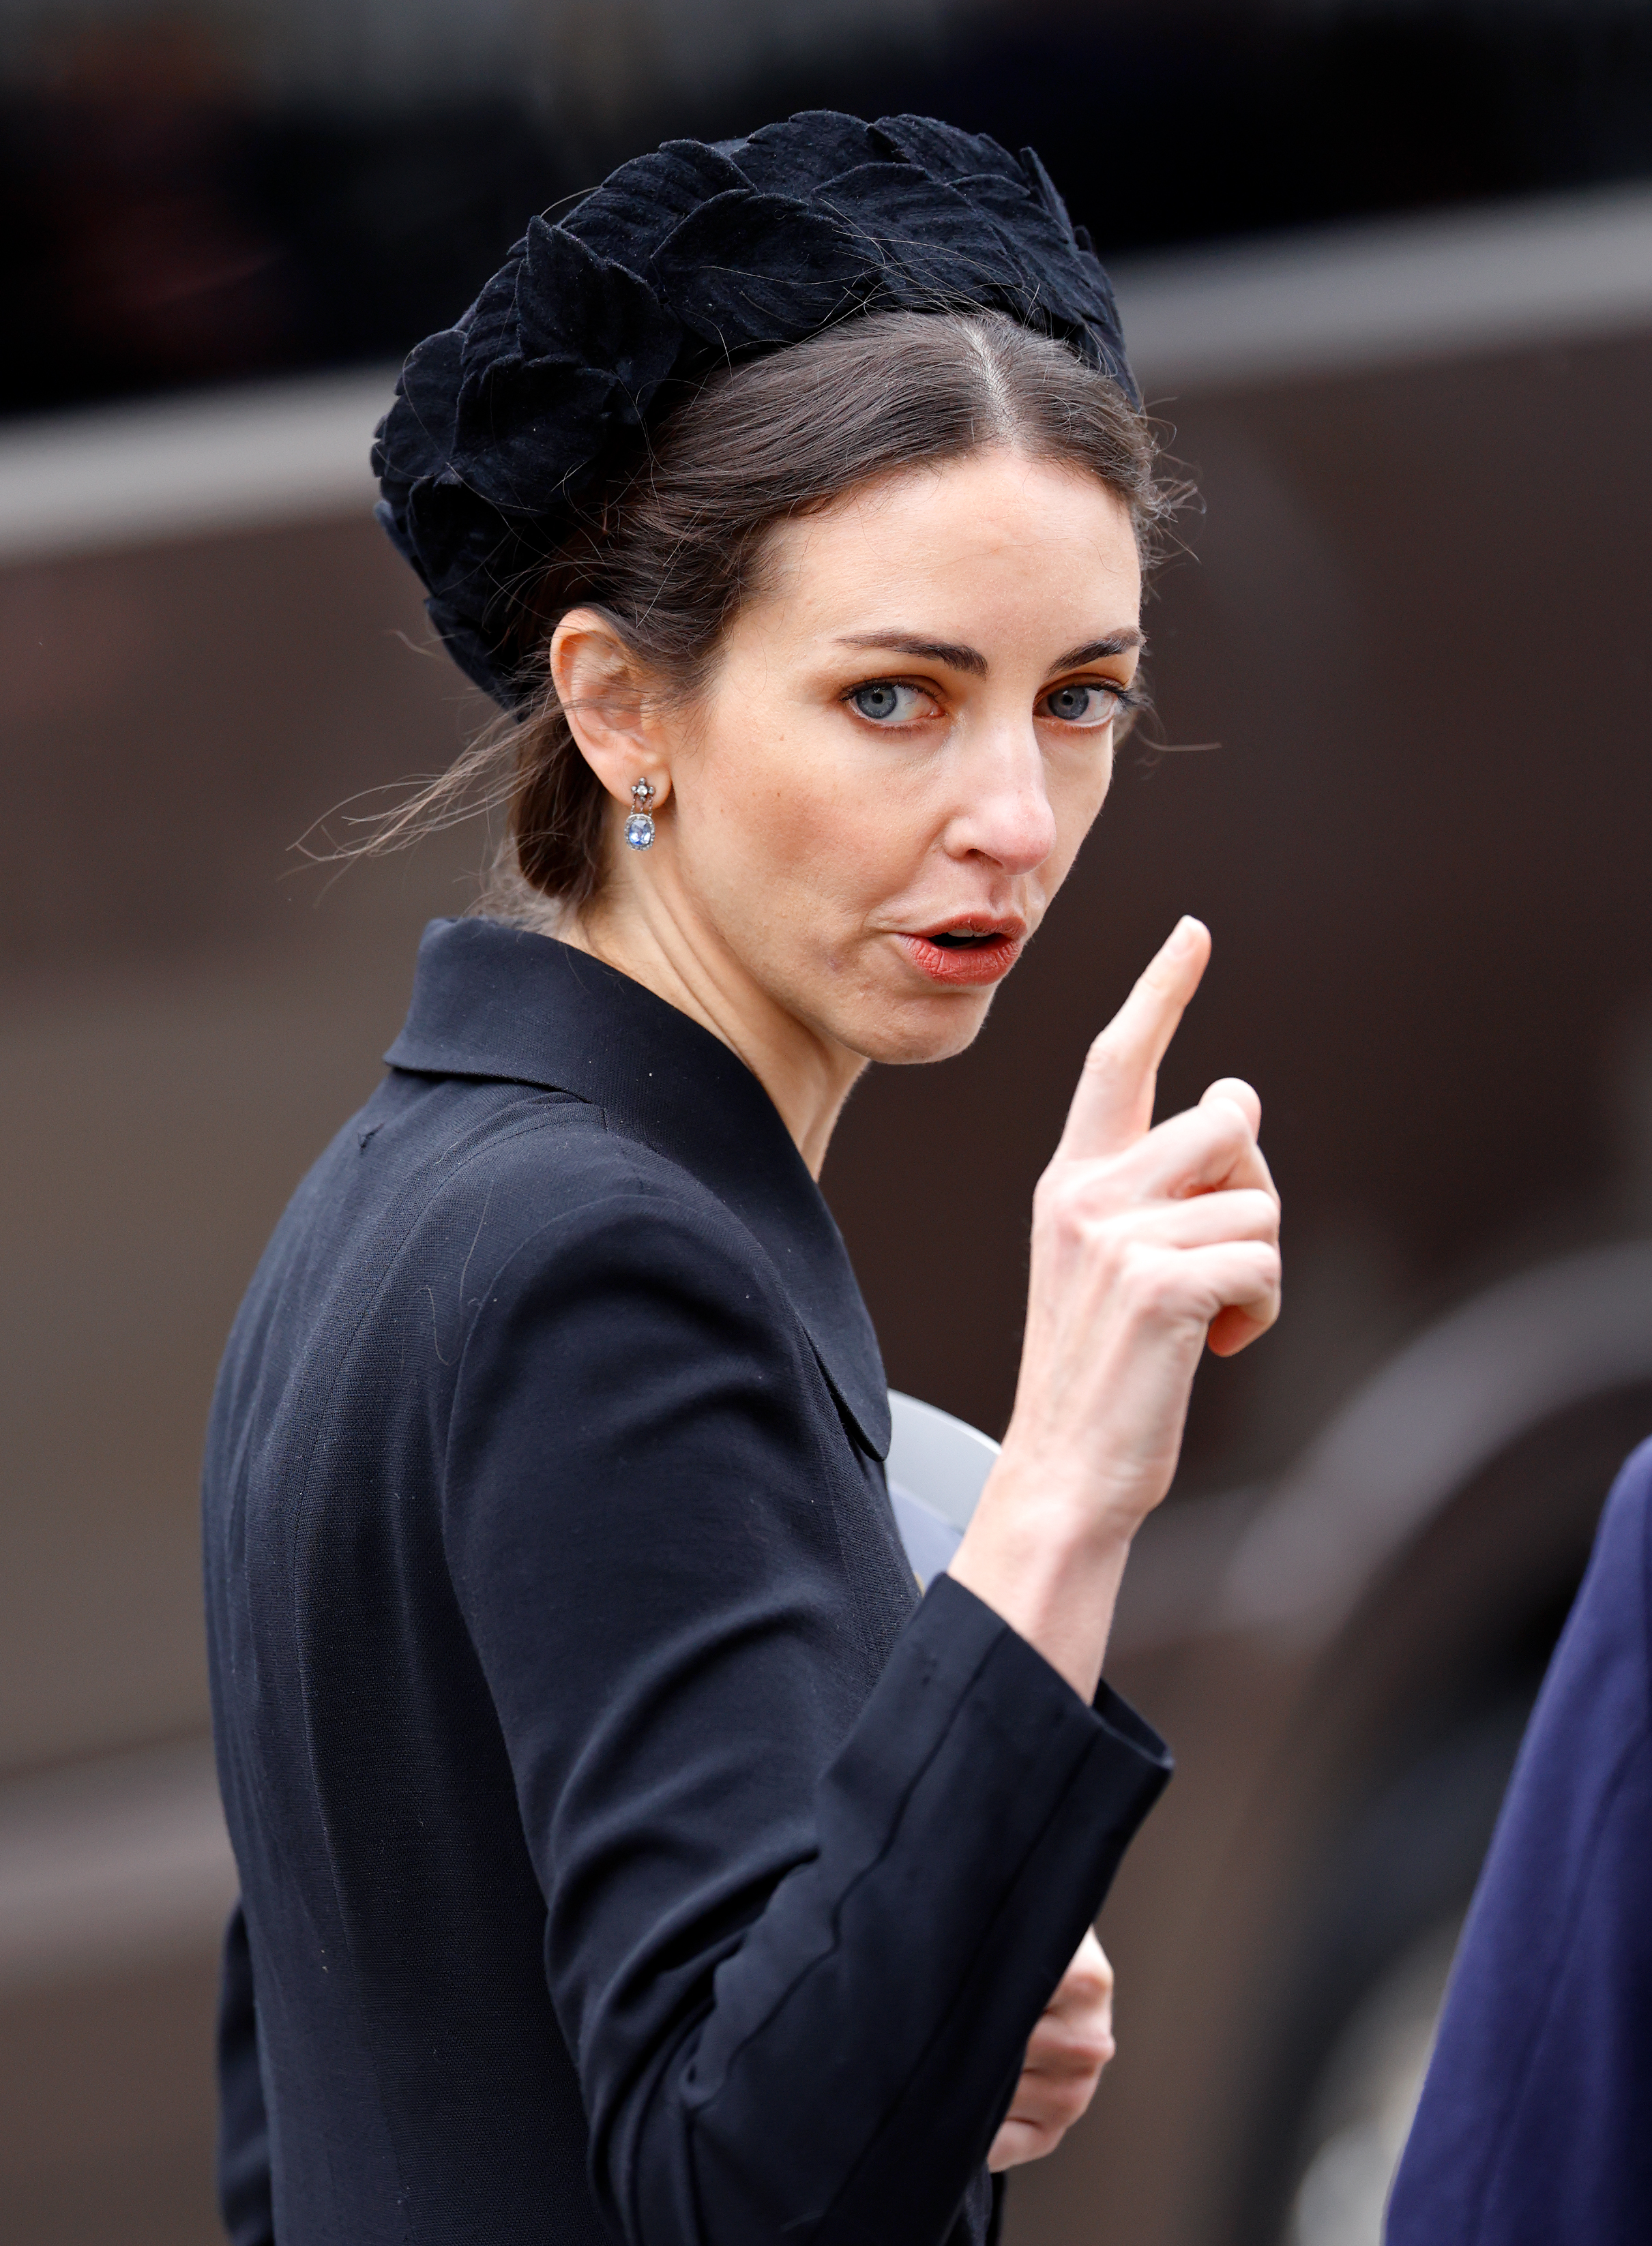 Lady Sarah Rose Hanbury at the Service of Thanksgiving for the life of Prince Philip, Duke of Edinburgh in London, England on March 29, 2022 | Source: Getty Images